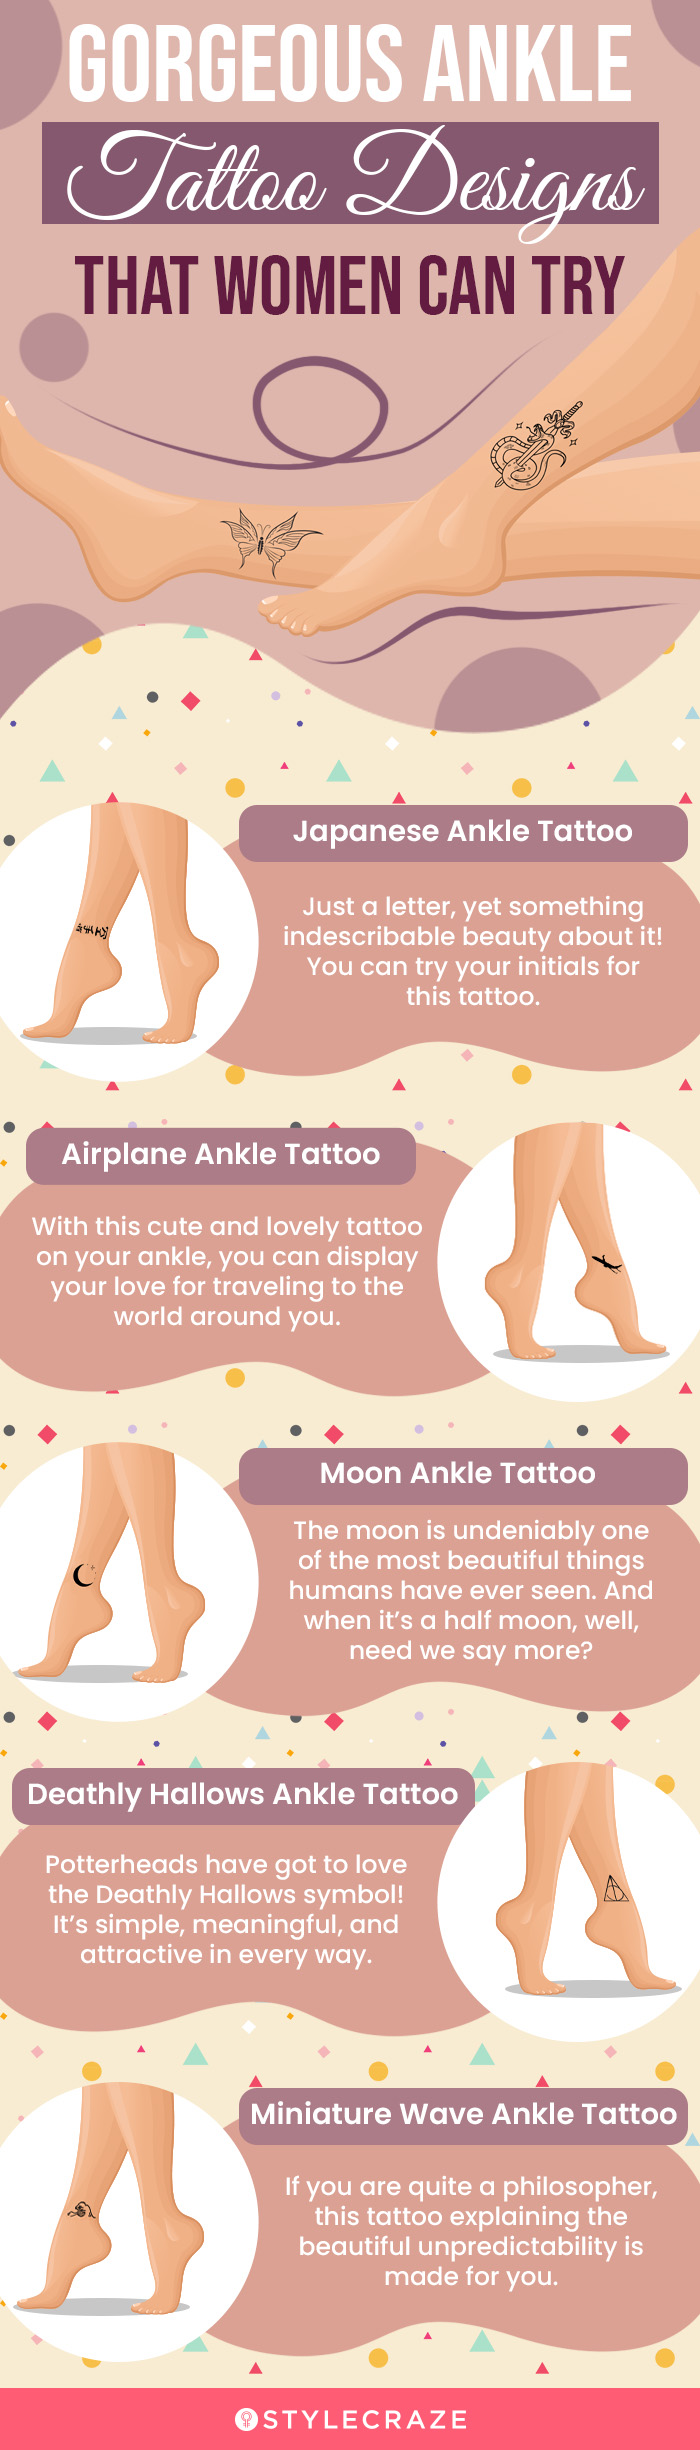 simple yet gorgeous ankle tattoo designs for women to try in 2022 (infographic)